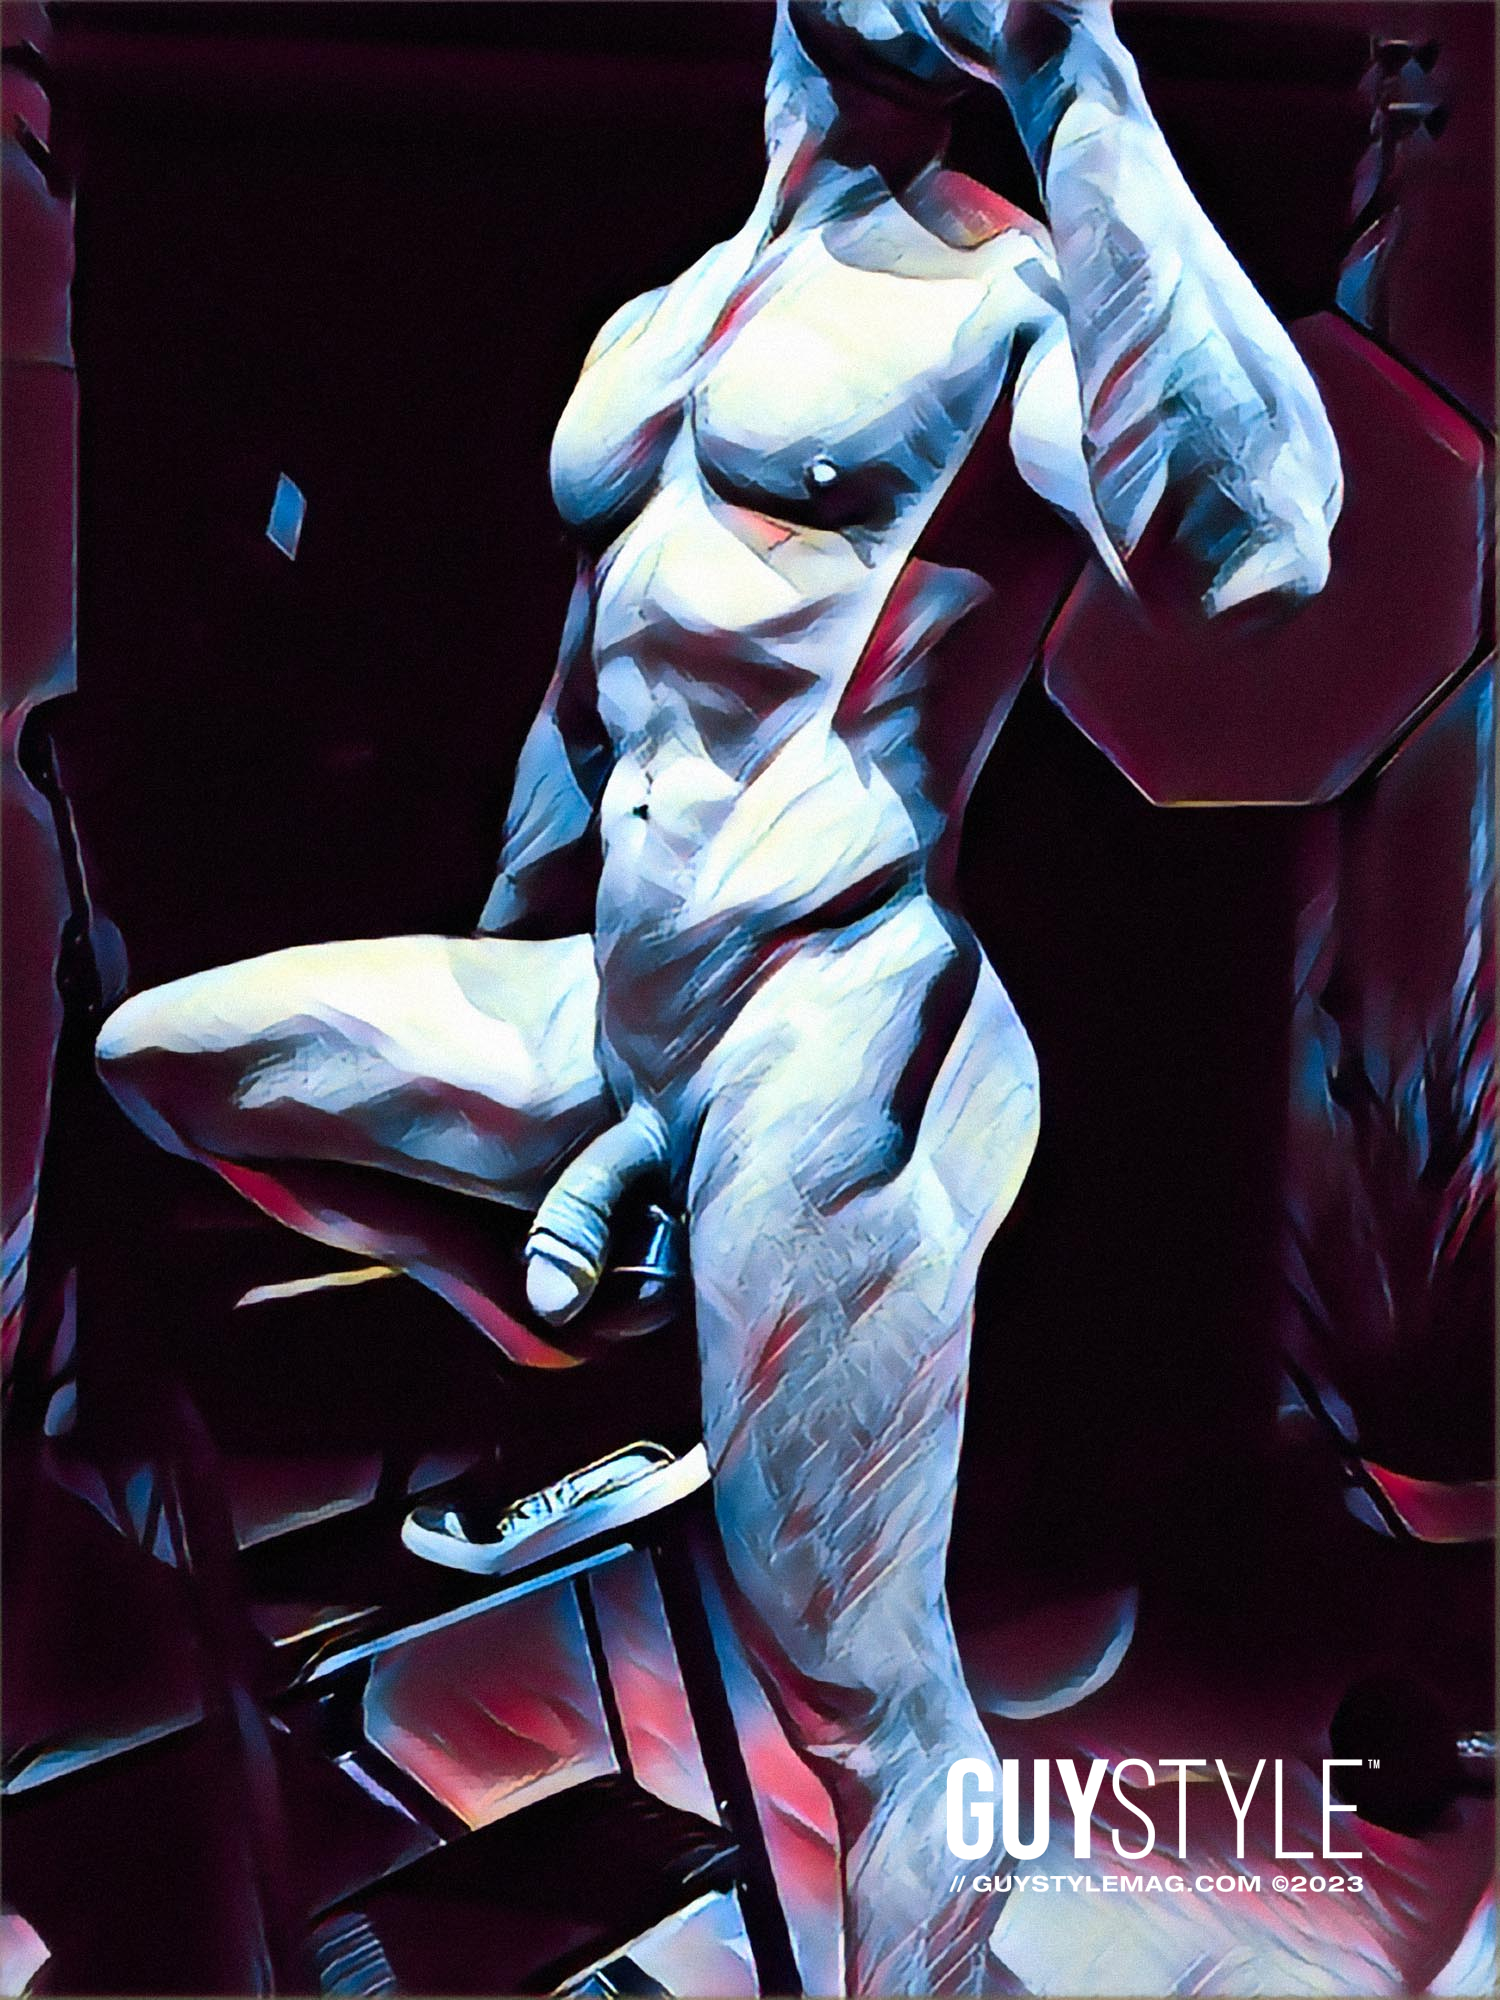 Gay Art for Sale: The Evolution of Homoerotic Art in NYC and the Inspiring Journey of Maxwell Alexander – Presented by HARD NEW YORK